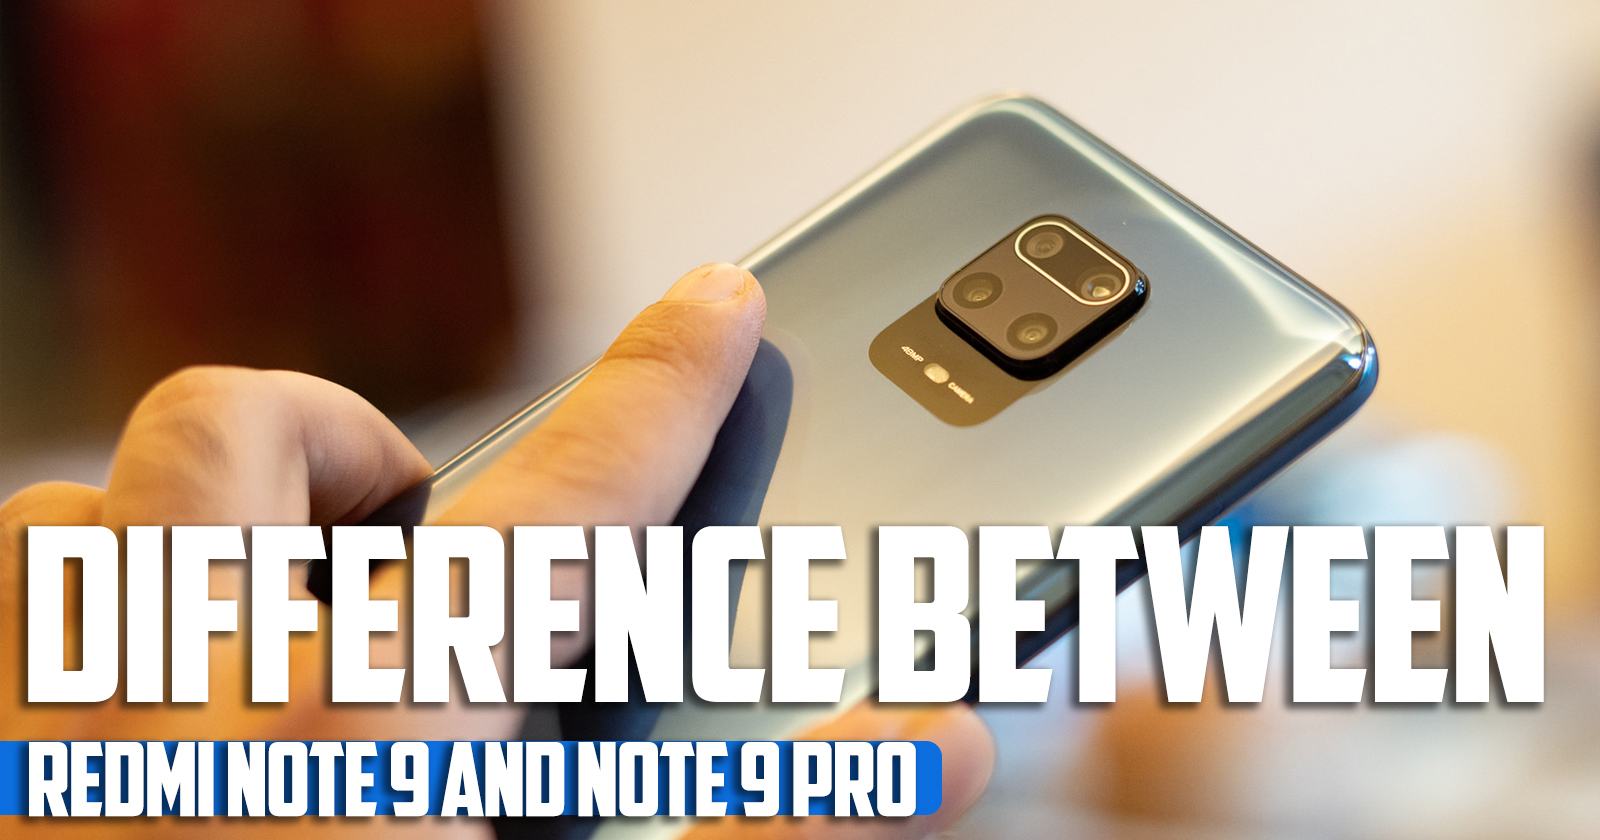 What is difference between Redmi note 9 and note 9 Pro?